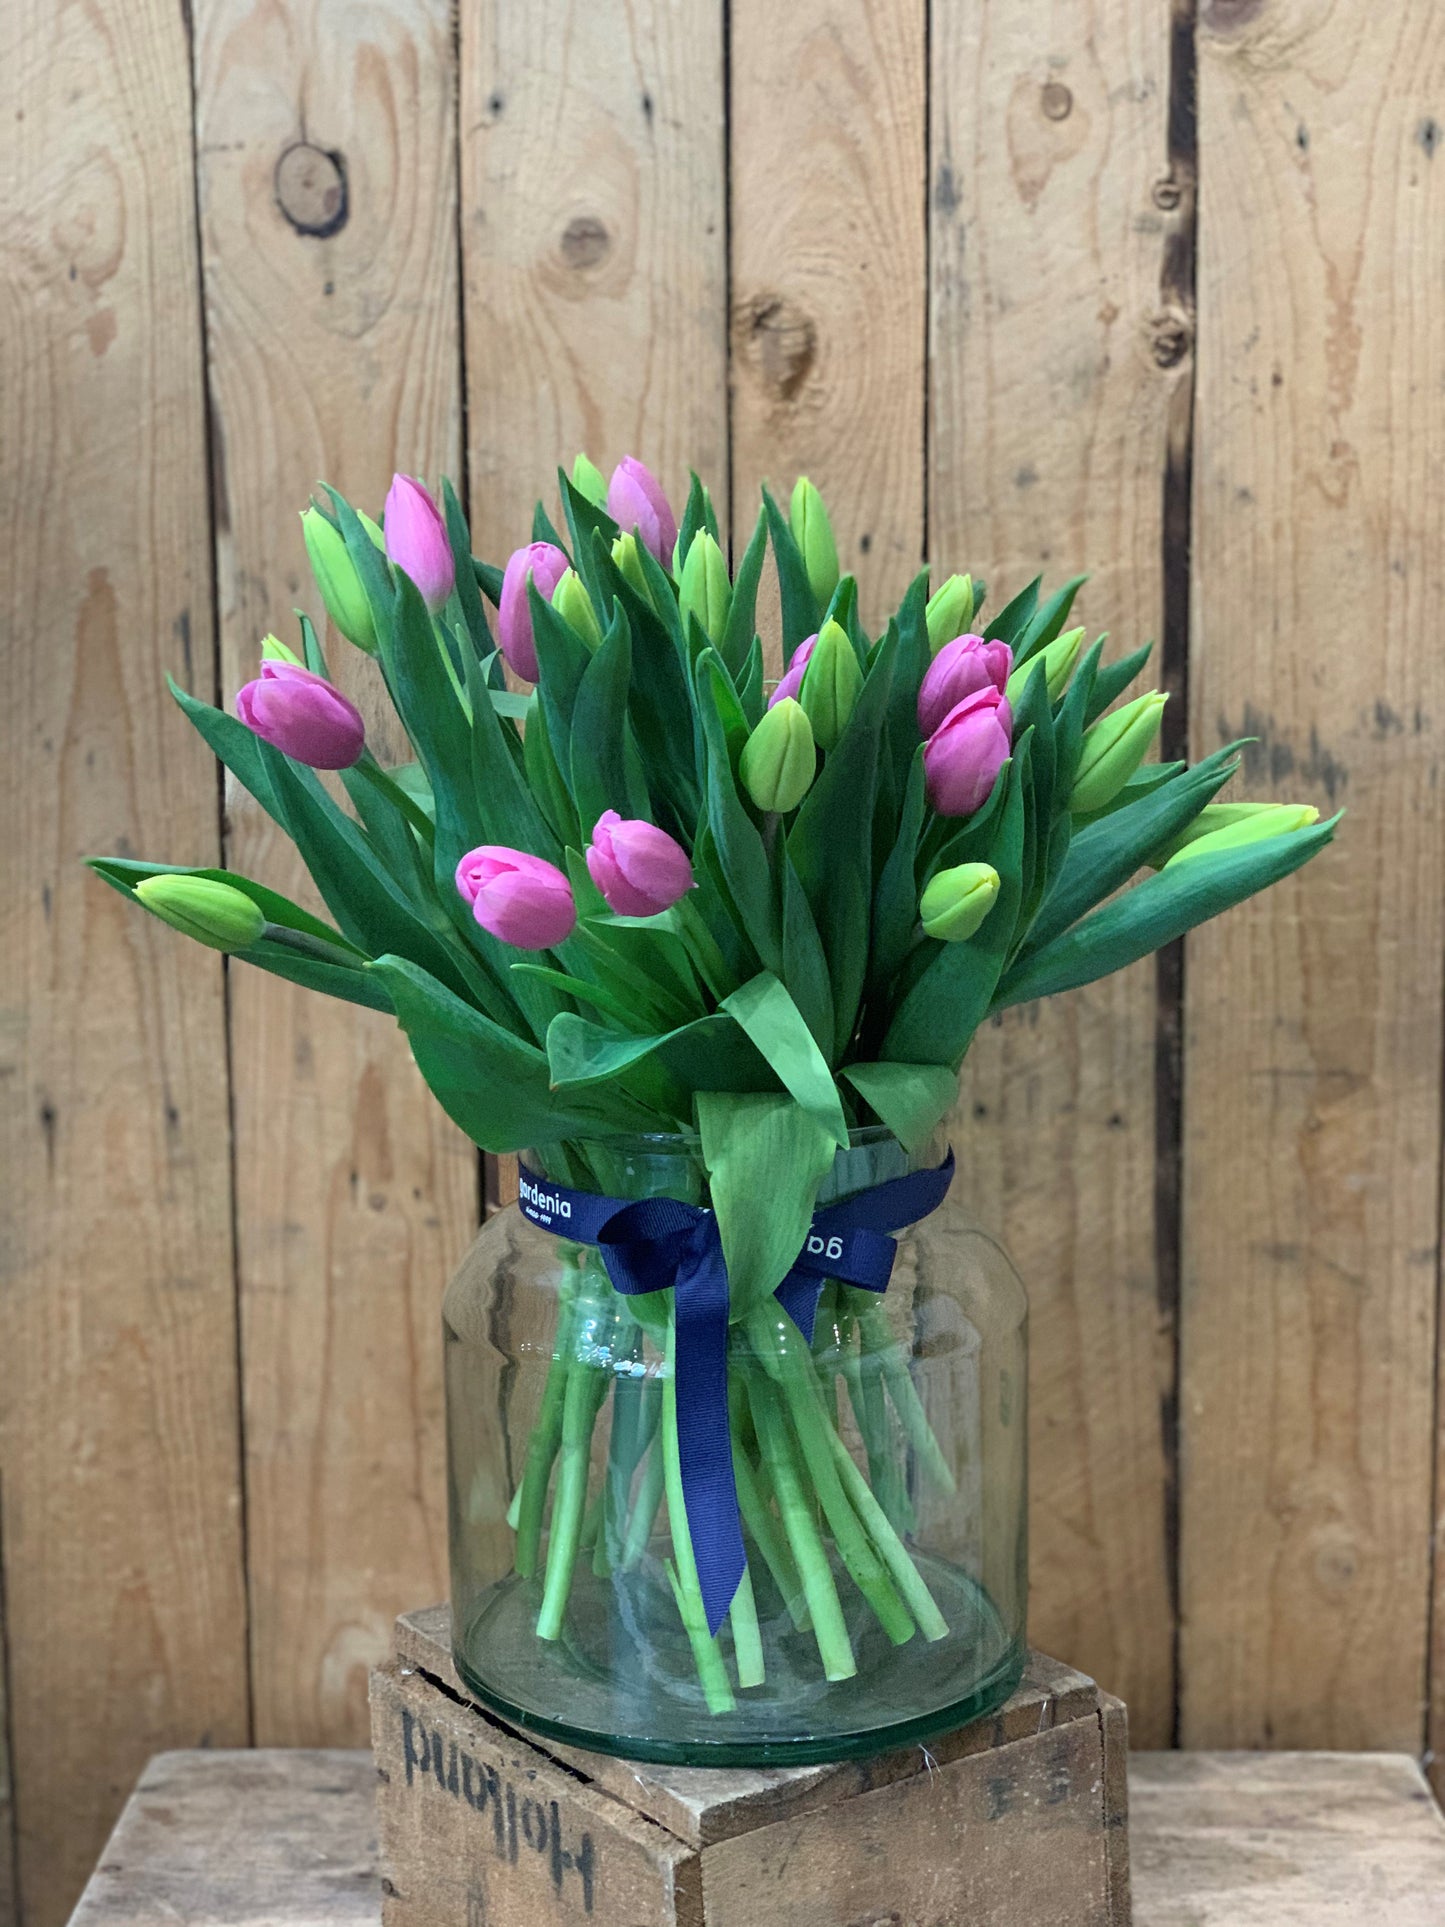 Our pick of the Tulips